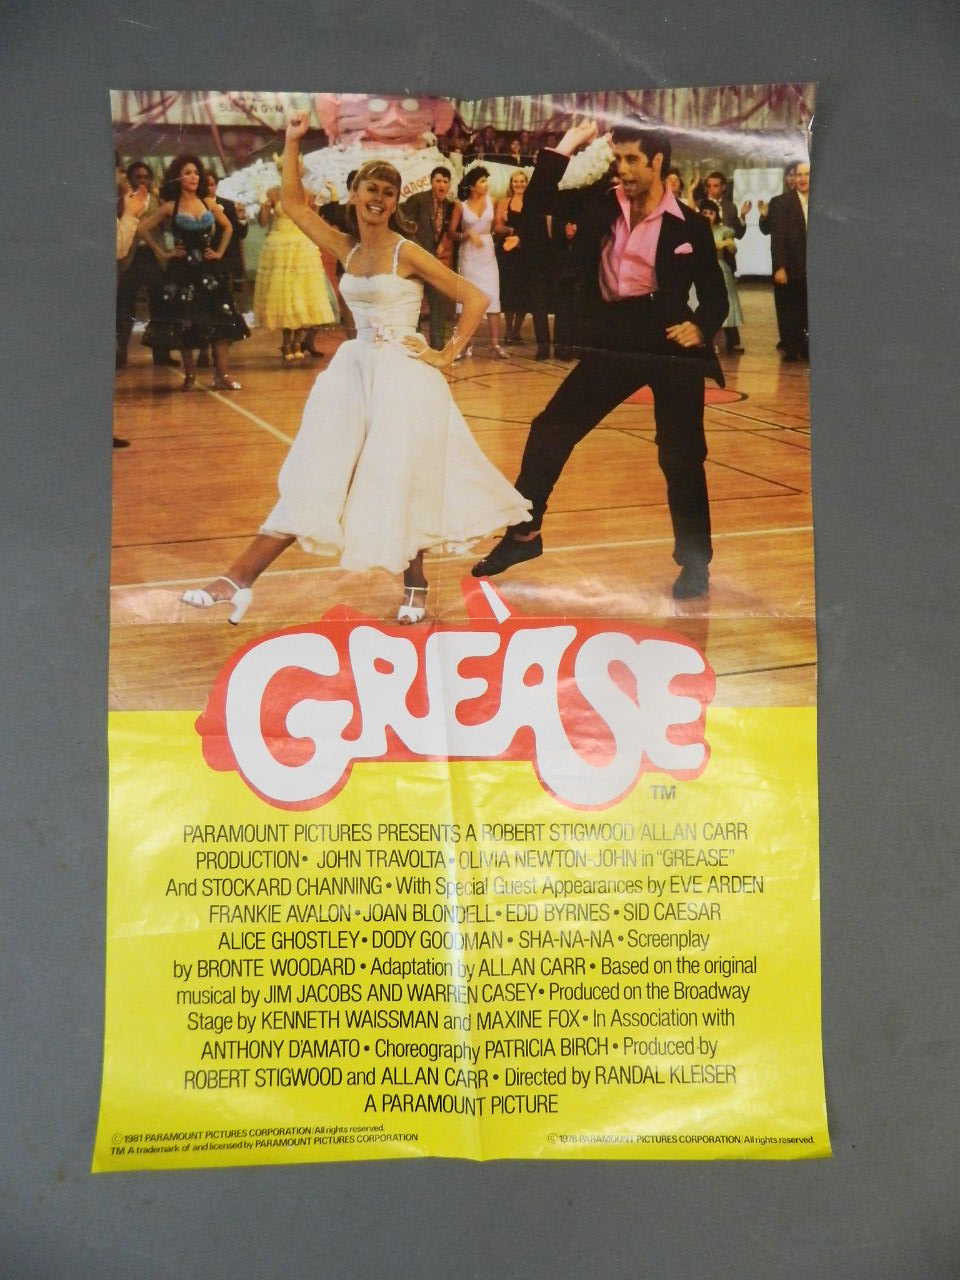 A 1981 film poster for 'Grease', 18" x 27"